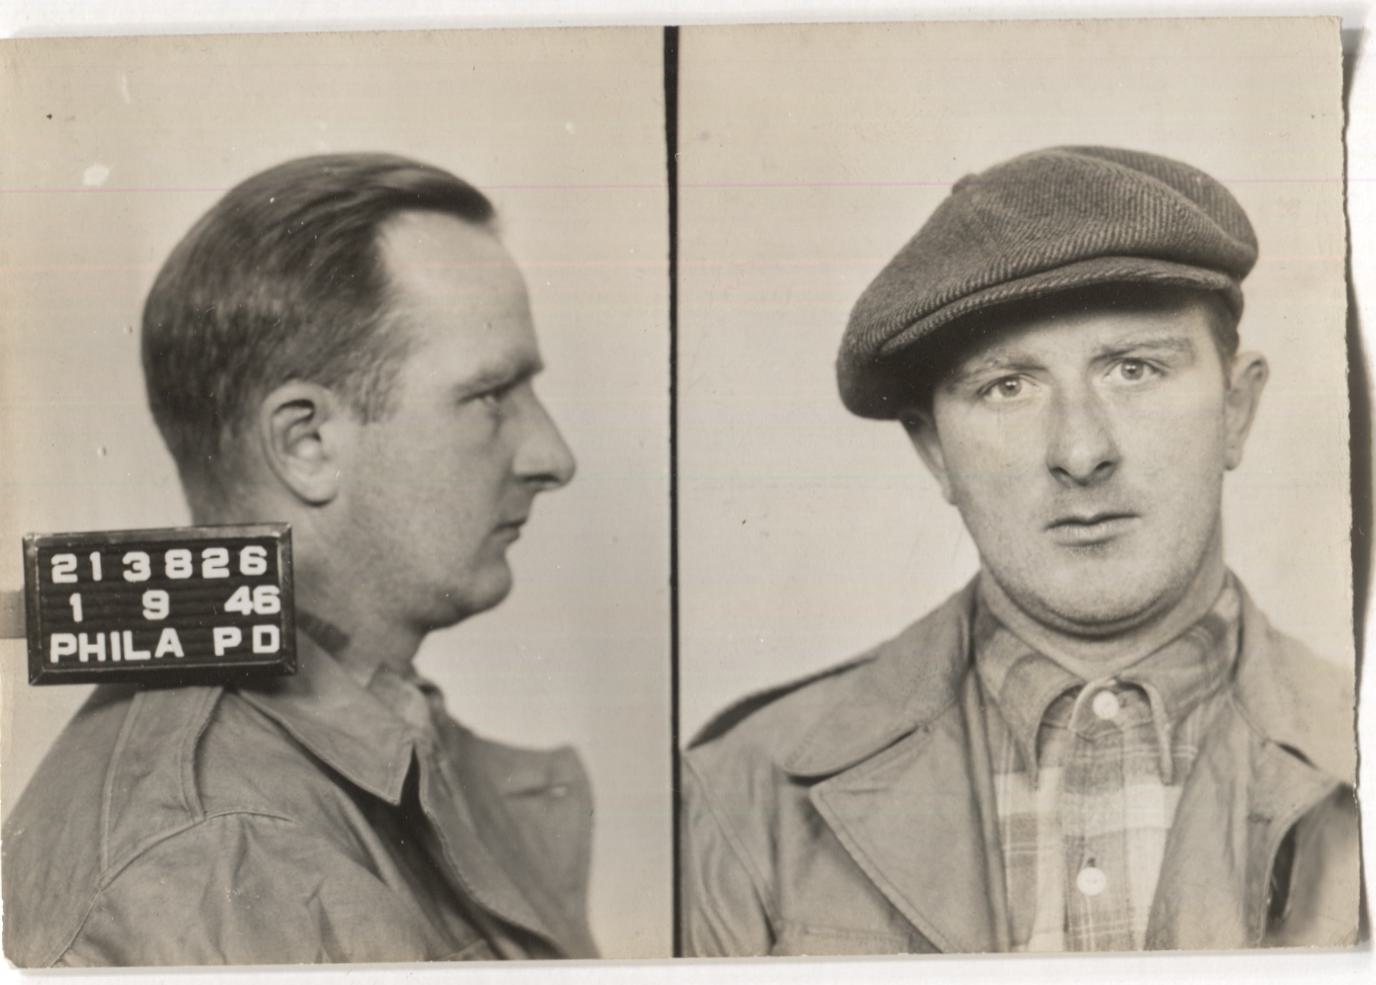 James Stanley Mugshot - Arrested on 1/9/1946 for Accessory to Larceny